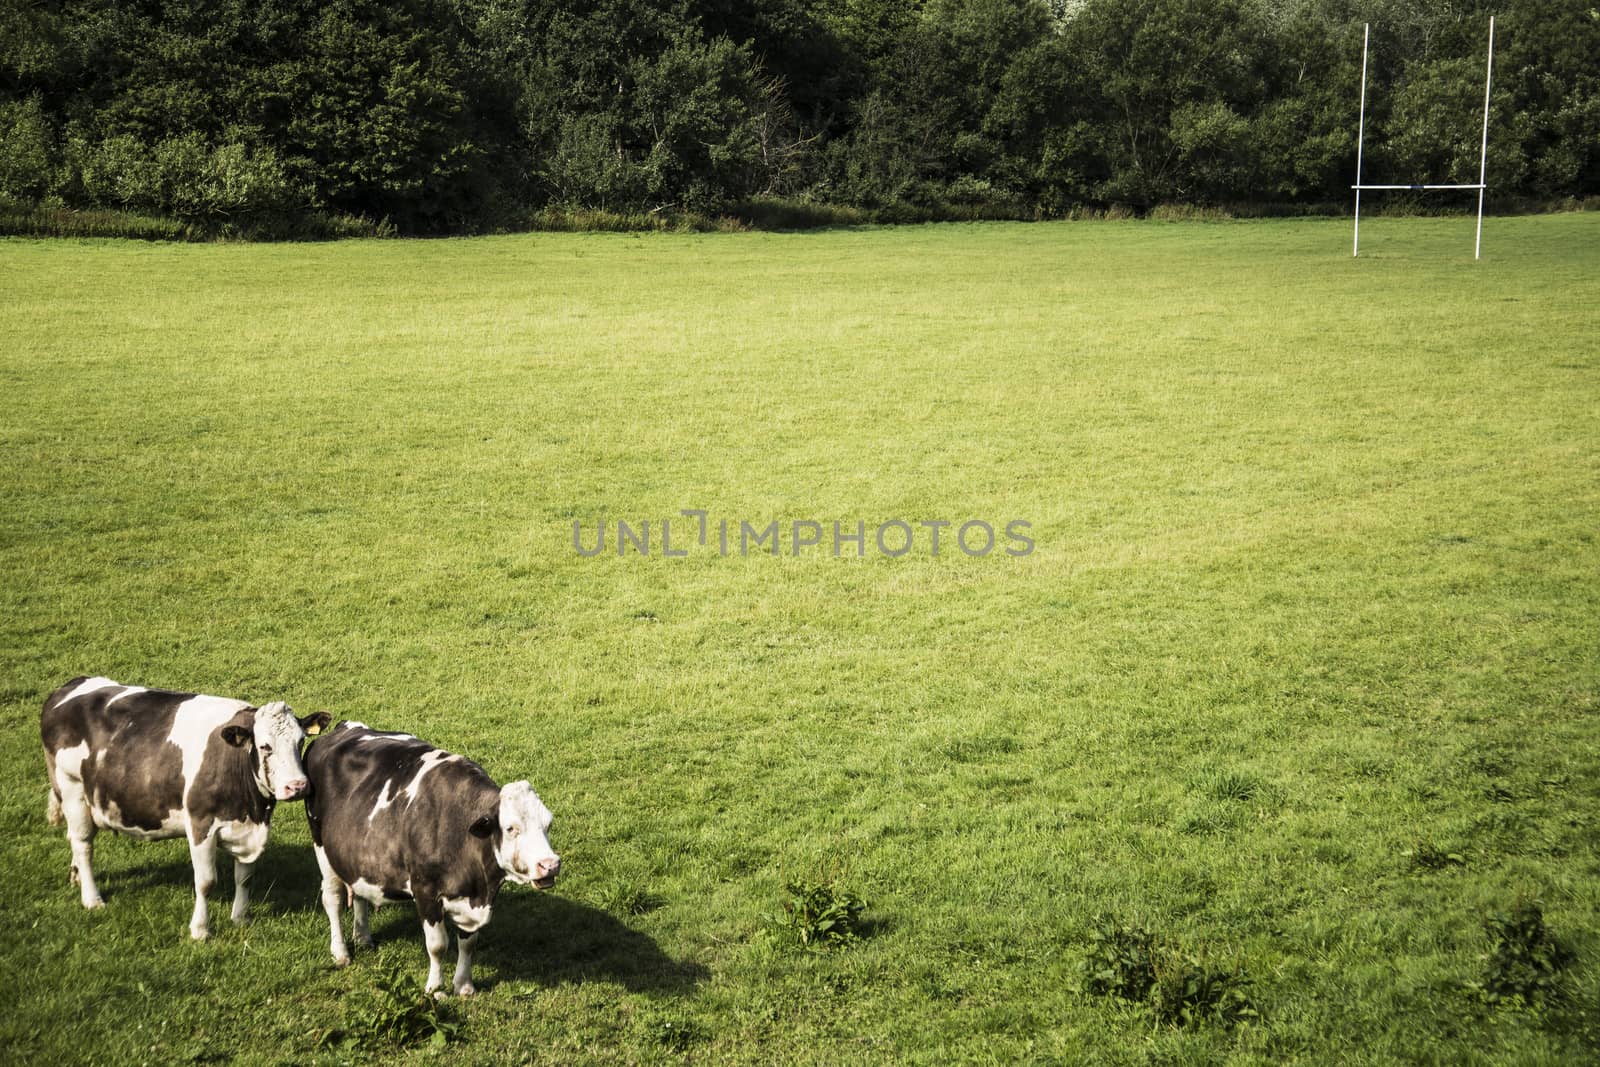 Cows on a green field by edella